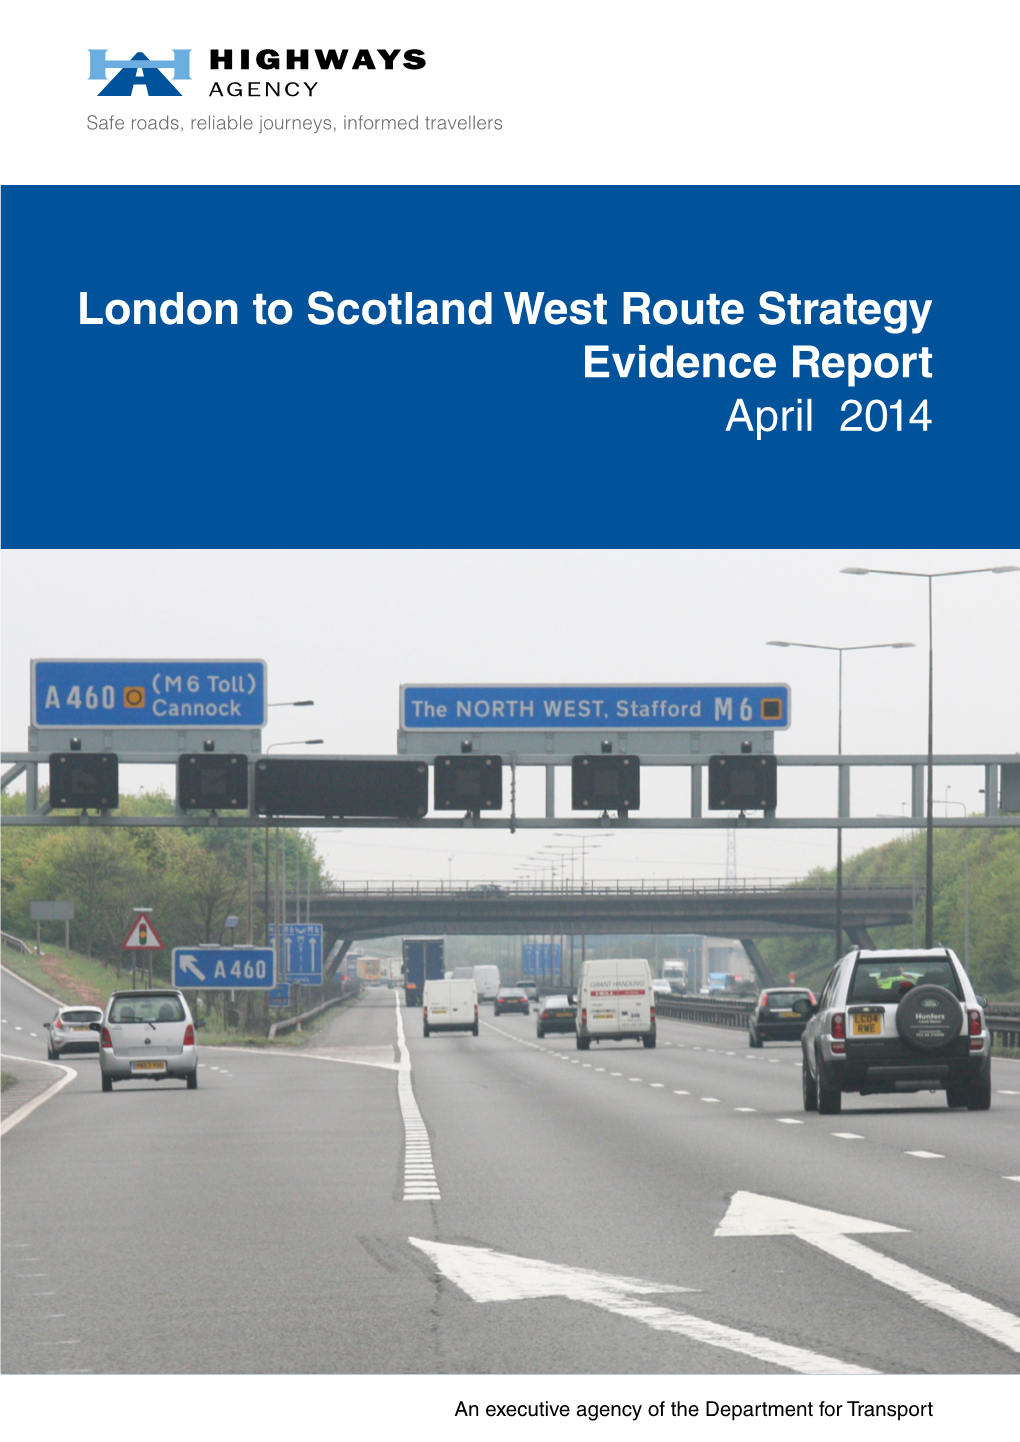 London to Scotland West Route Strategy Evidence Report April 2014